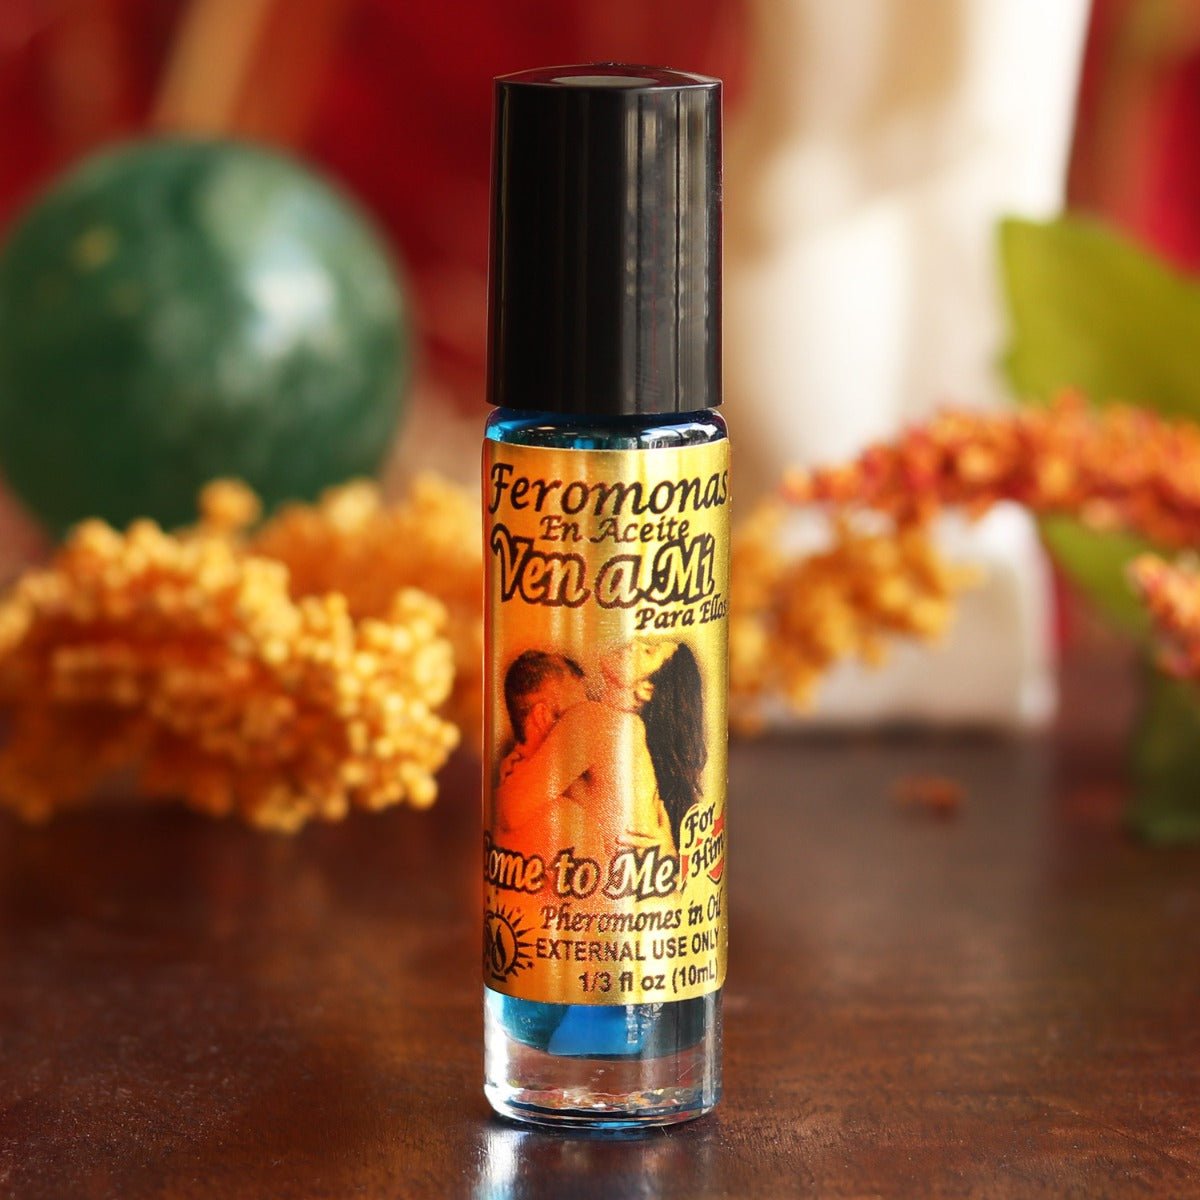 Come To Me for Him Pheromone Oil - 13 Moons